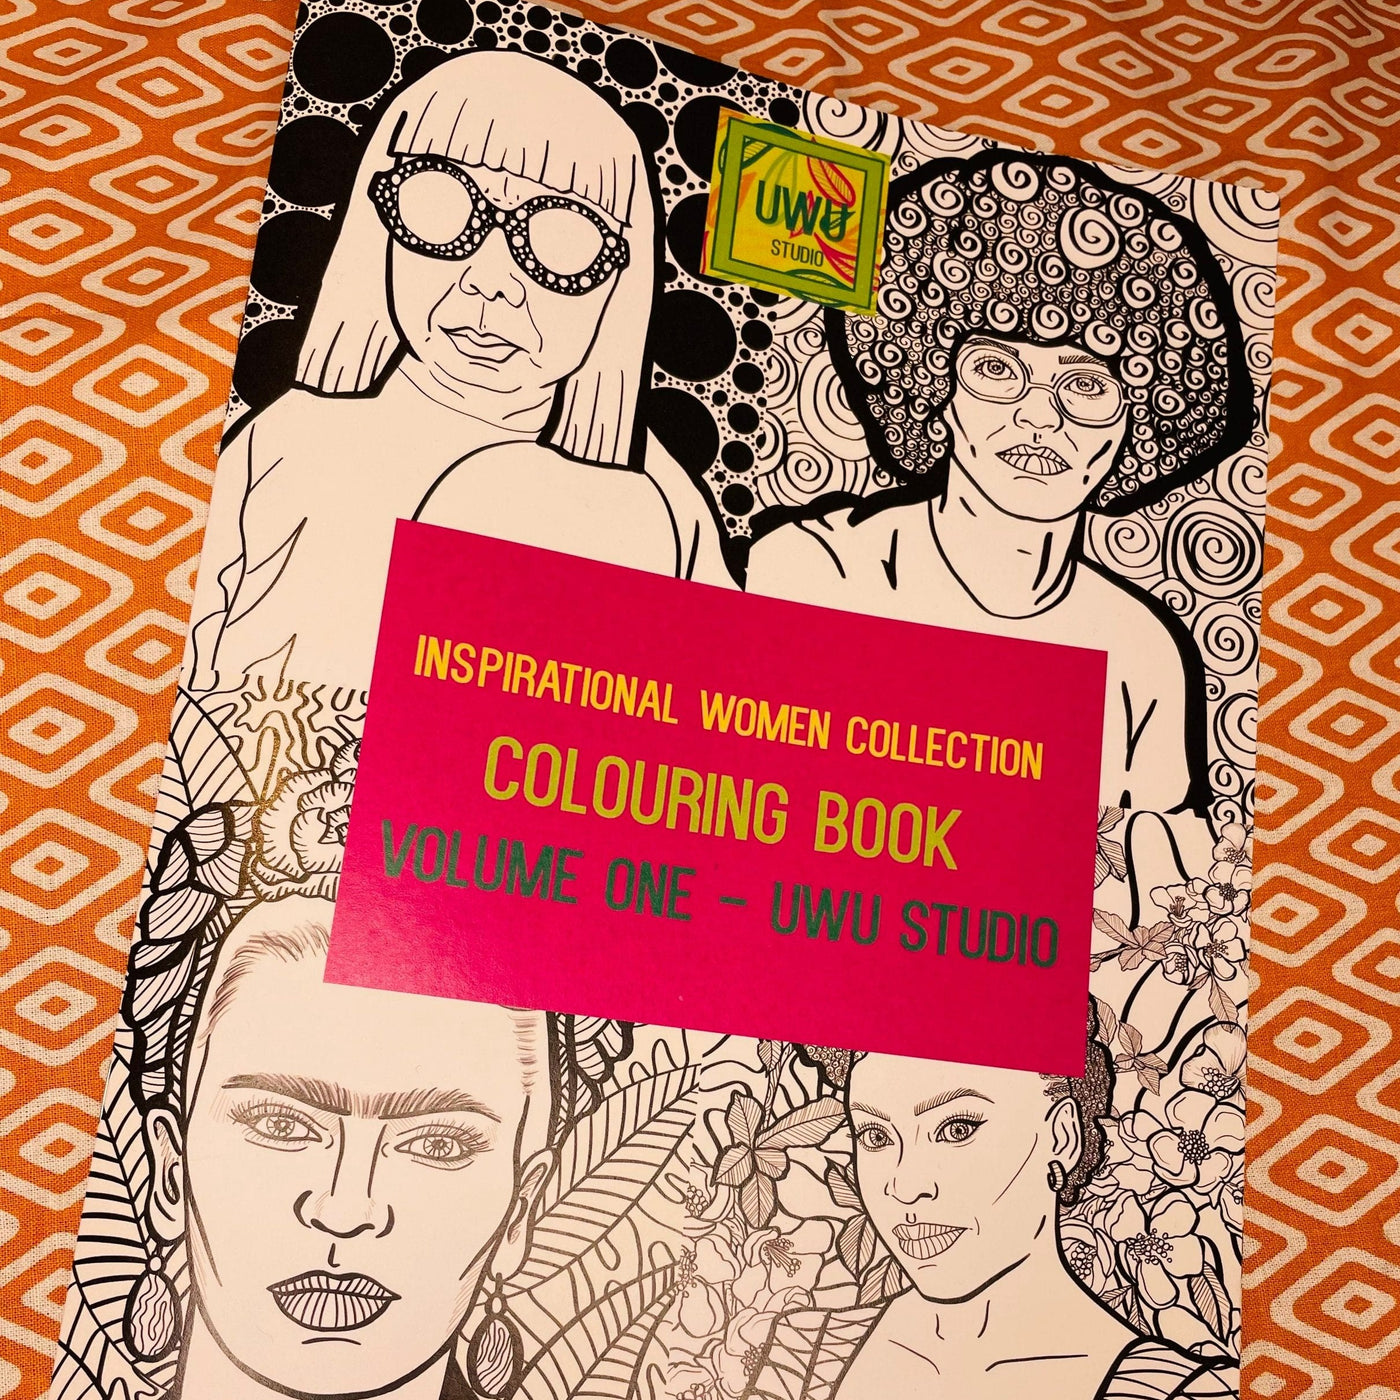 Inspirational Women Colouring Book by Uwu Studio - Artists & Authors